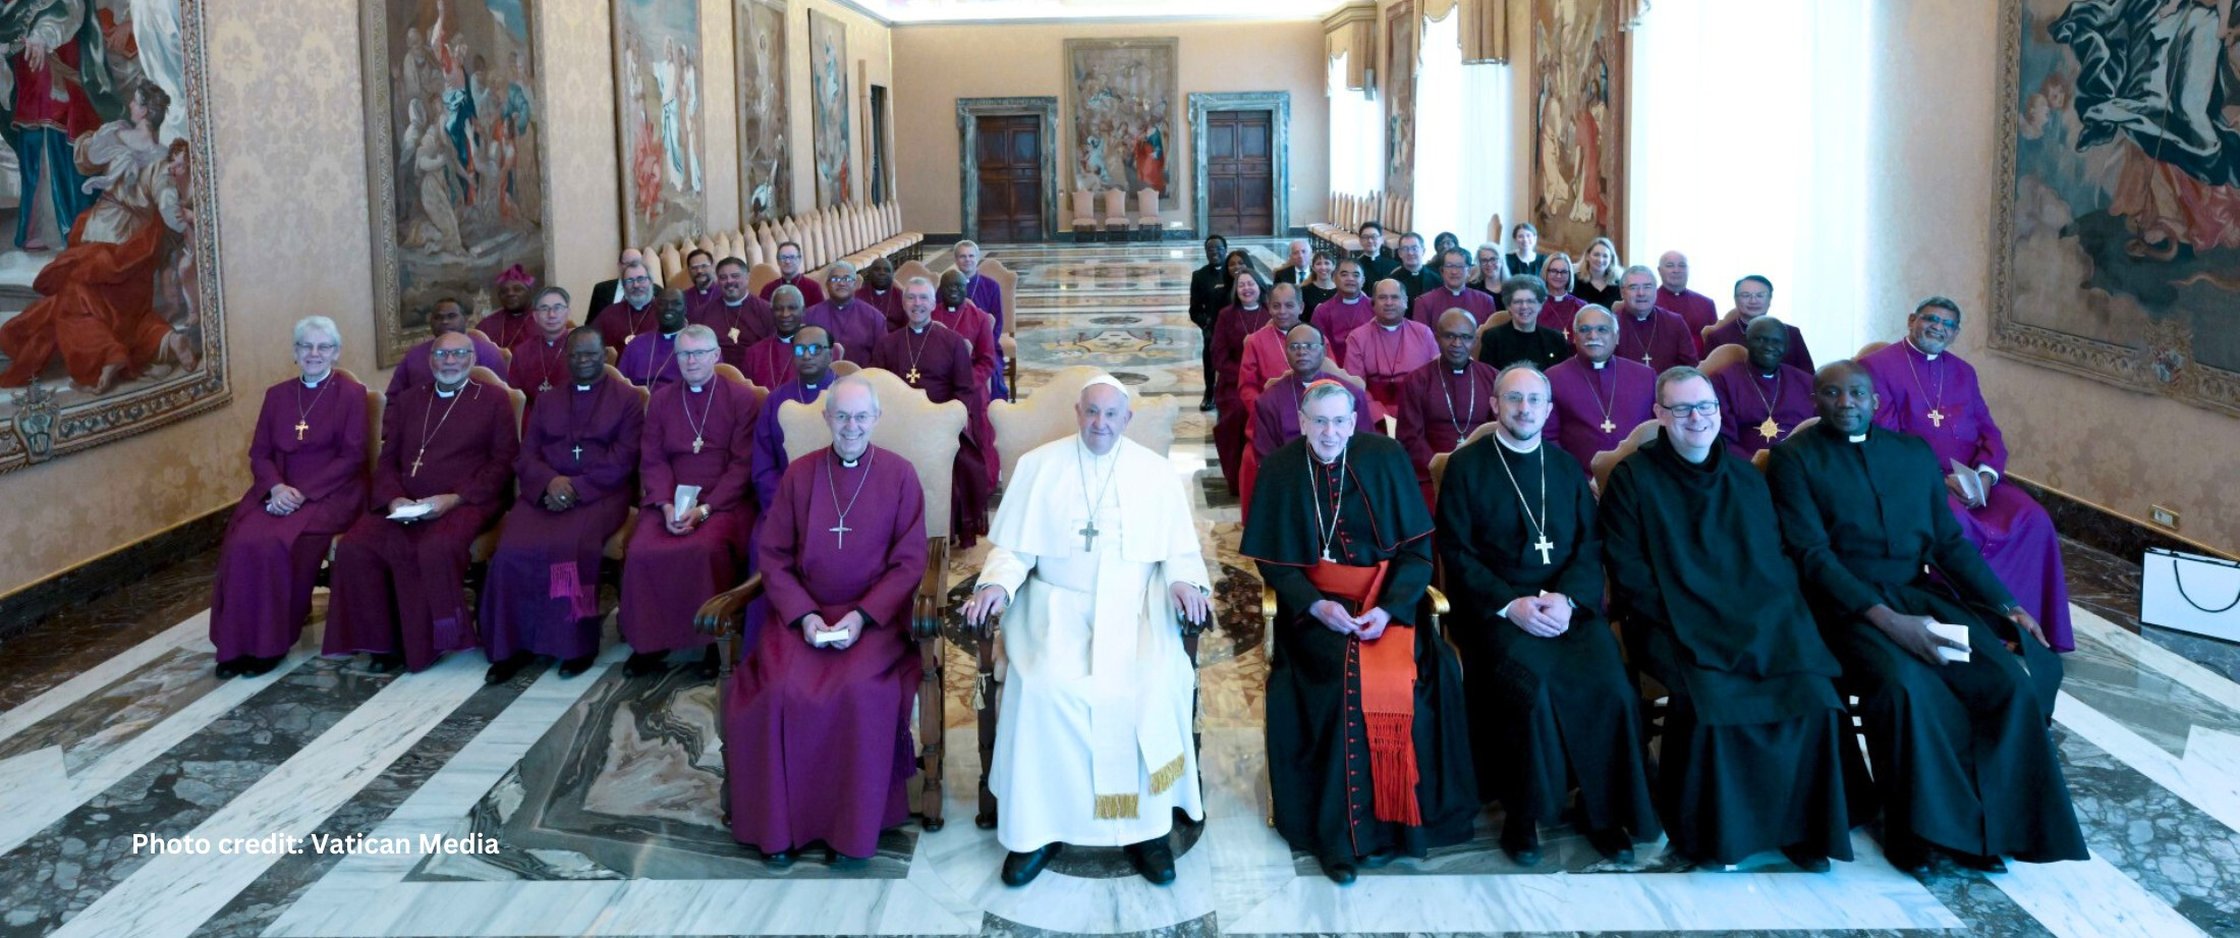 Archbishop John McDowell meets Pope Francis with Anglican Communion Primates